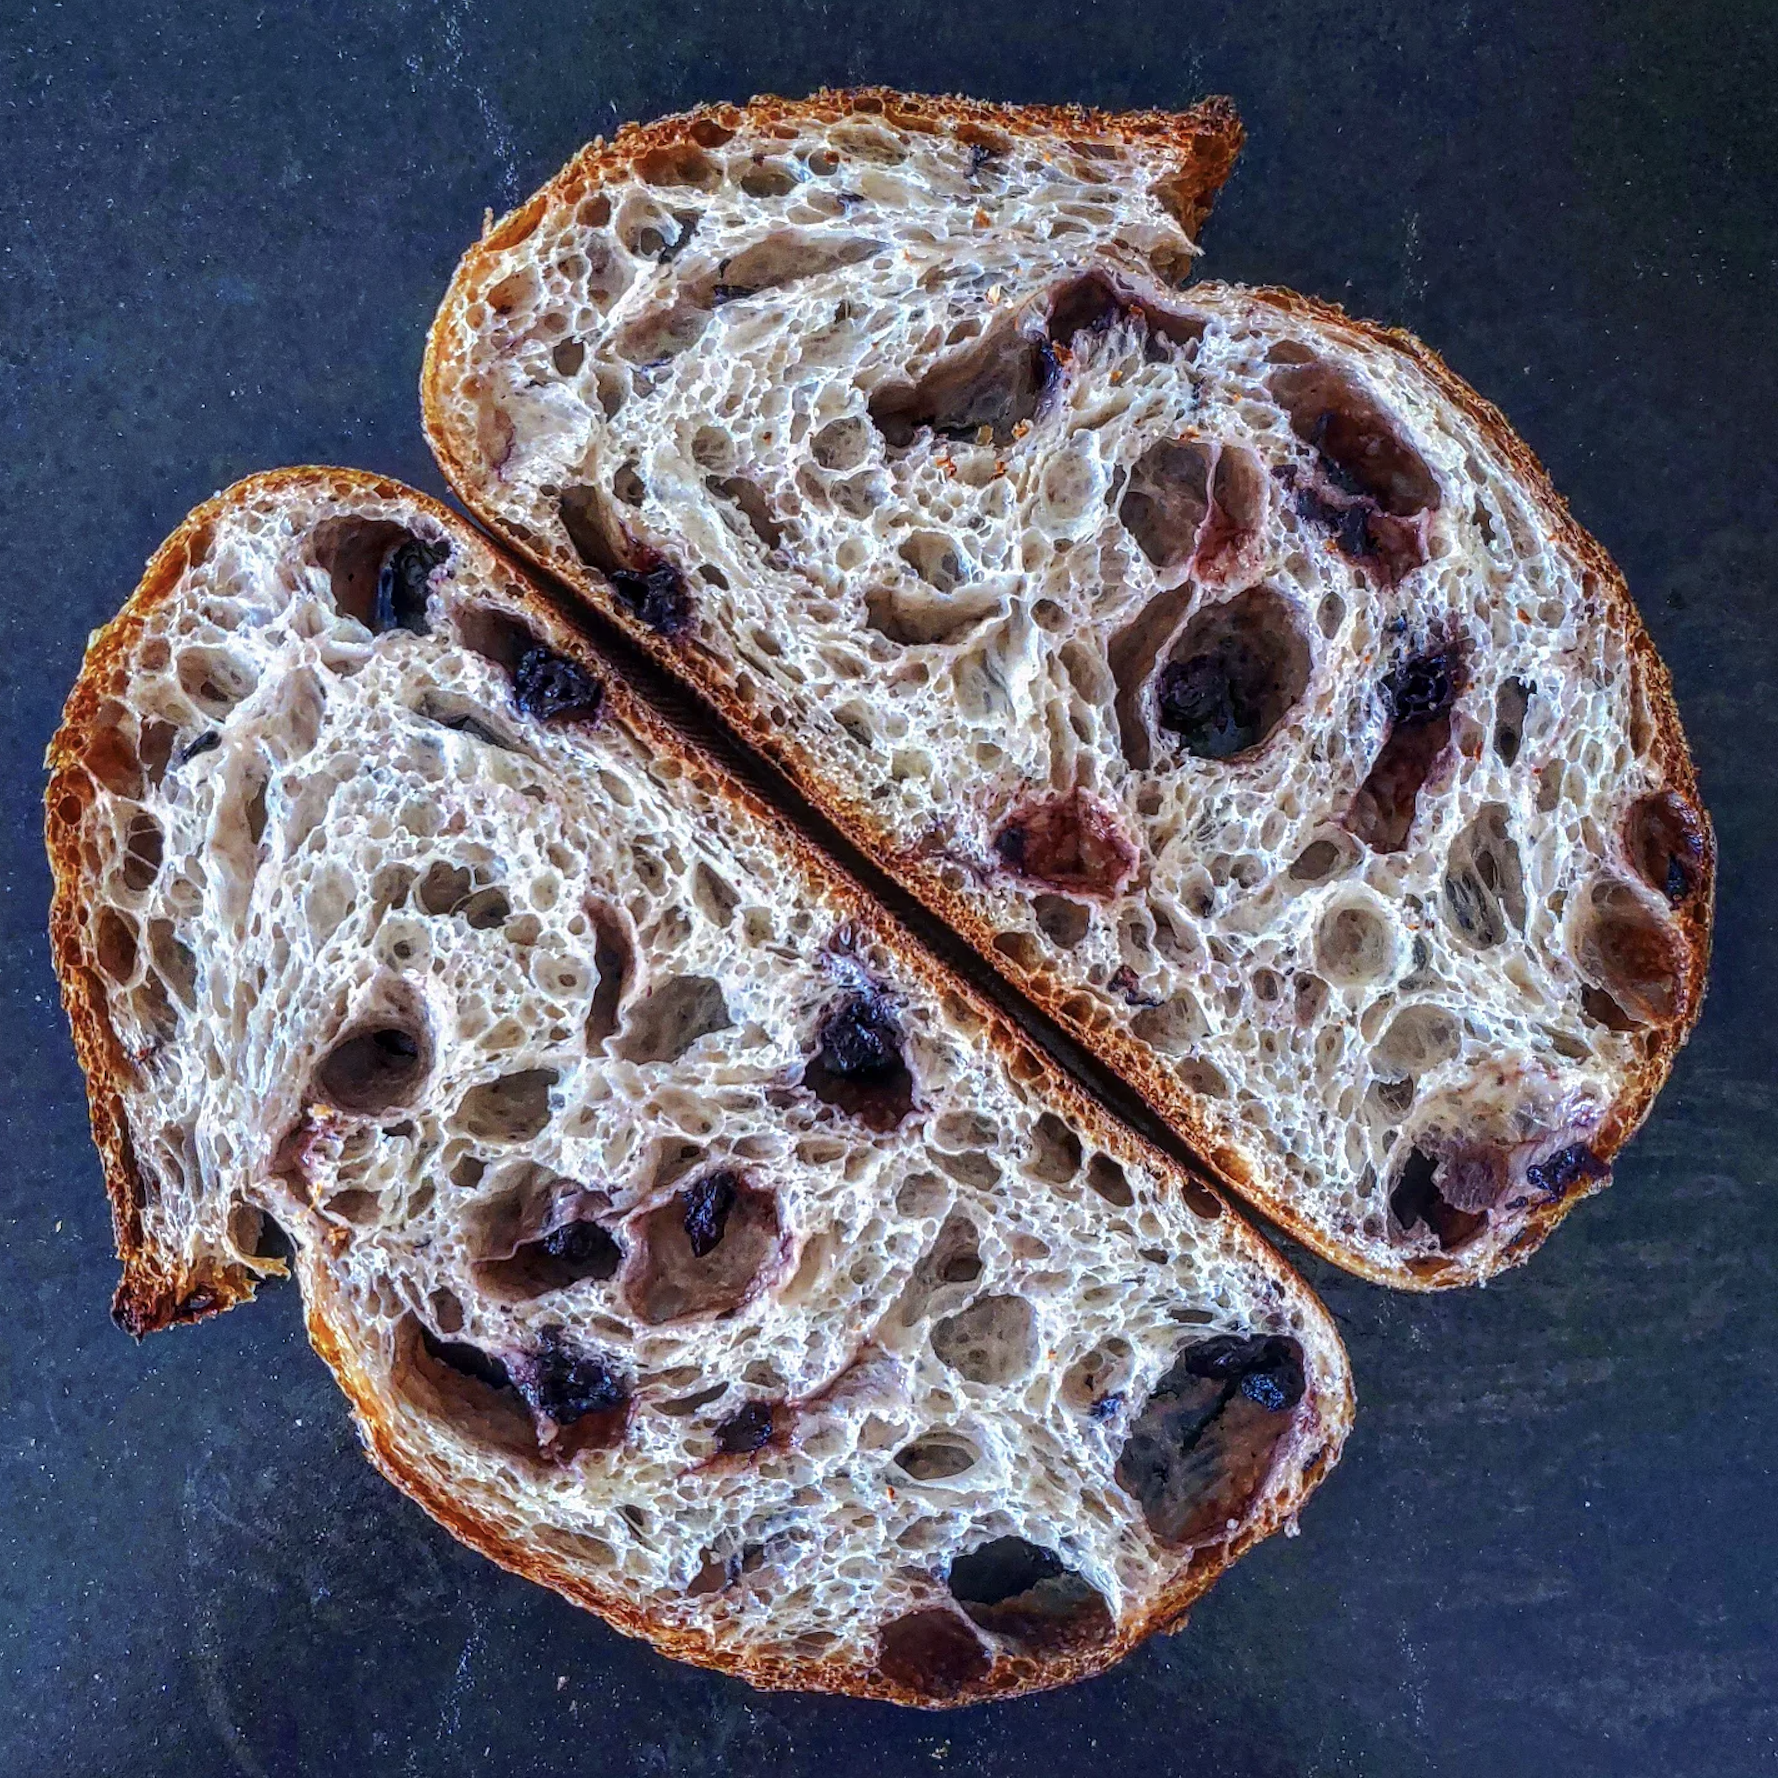 sourdough bread influencer at home baker social media instagram video content creator Judy from @OhForTheLoaf in San Francisco California United States 32137